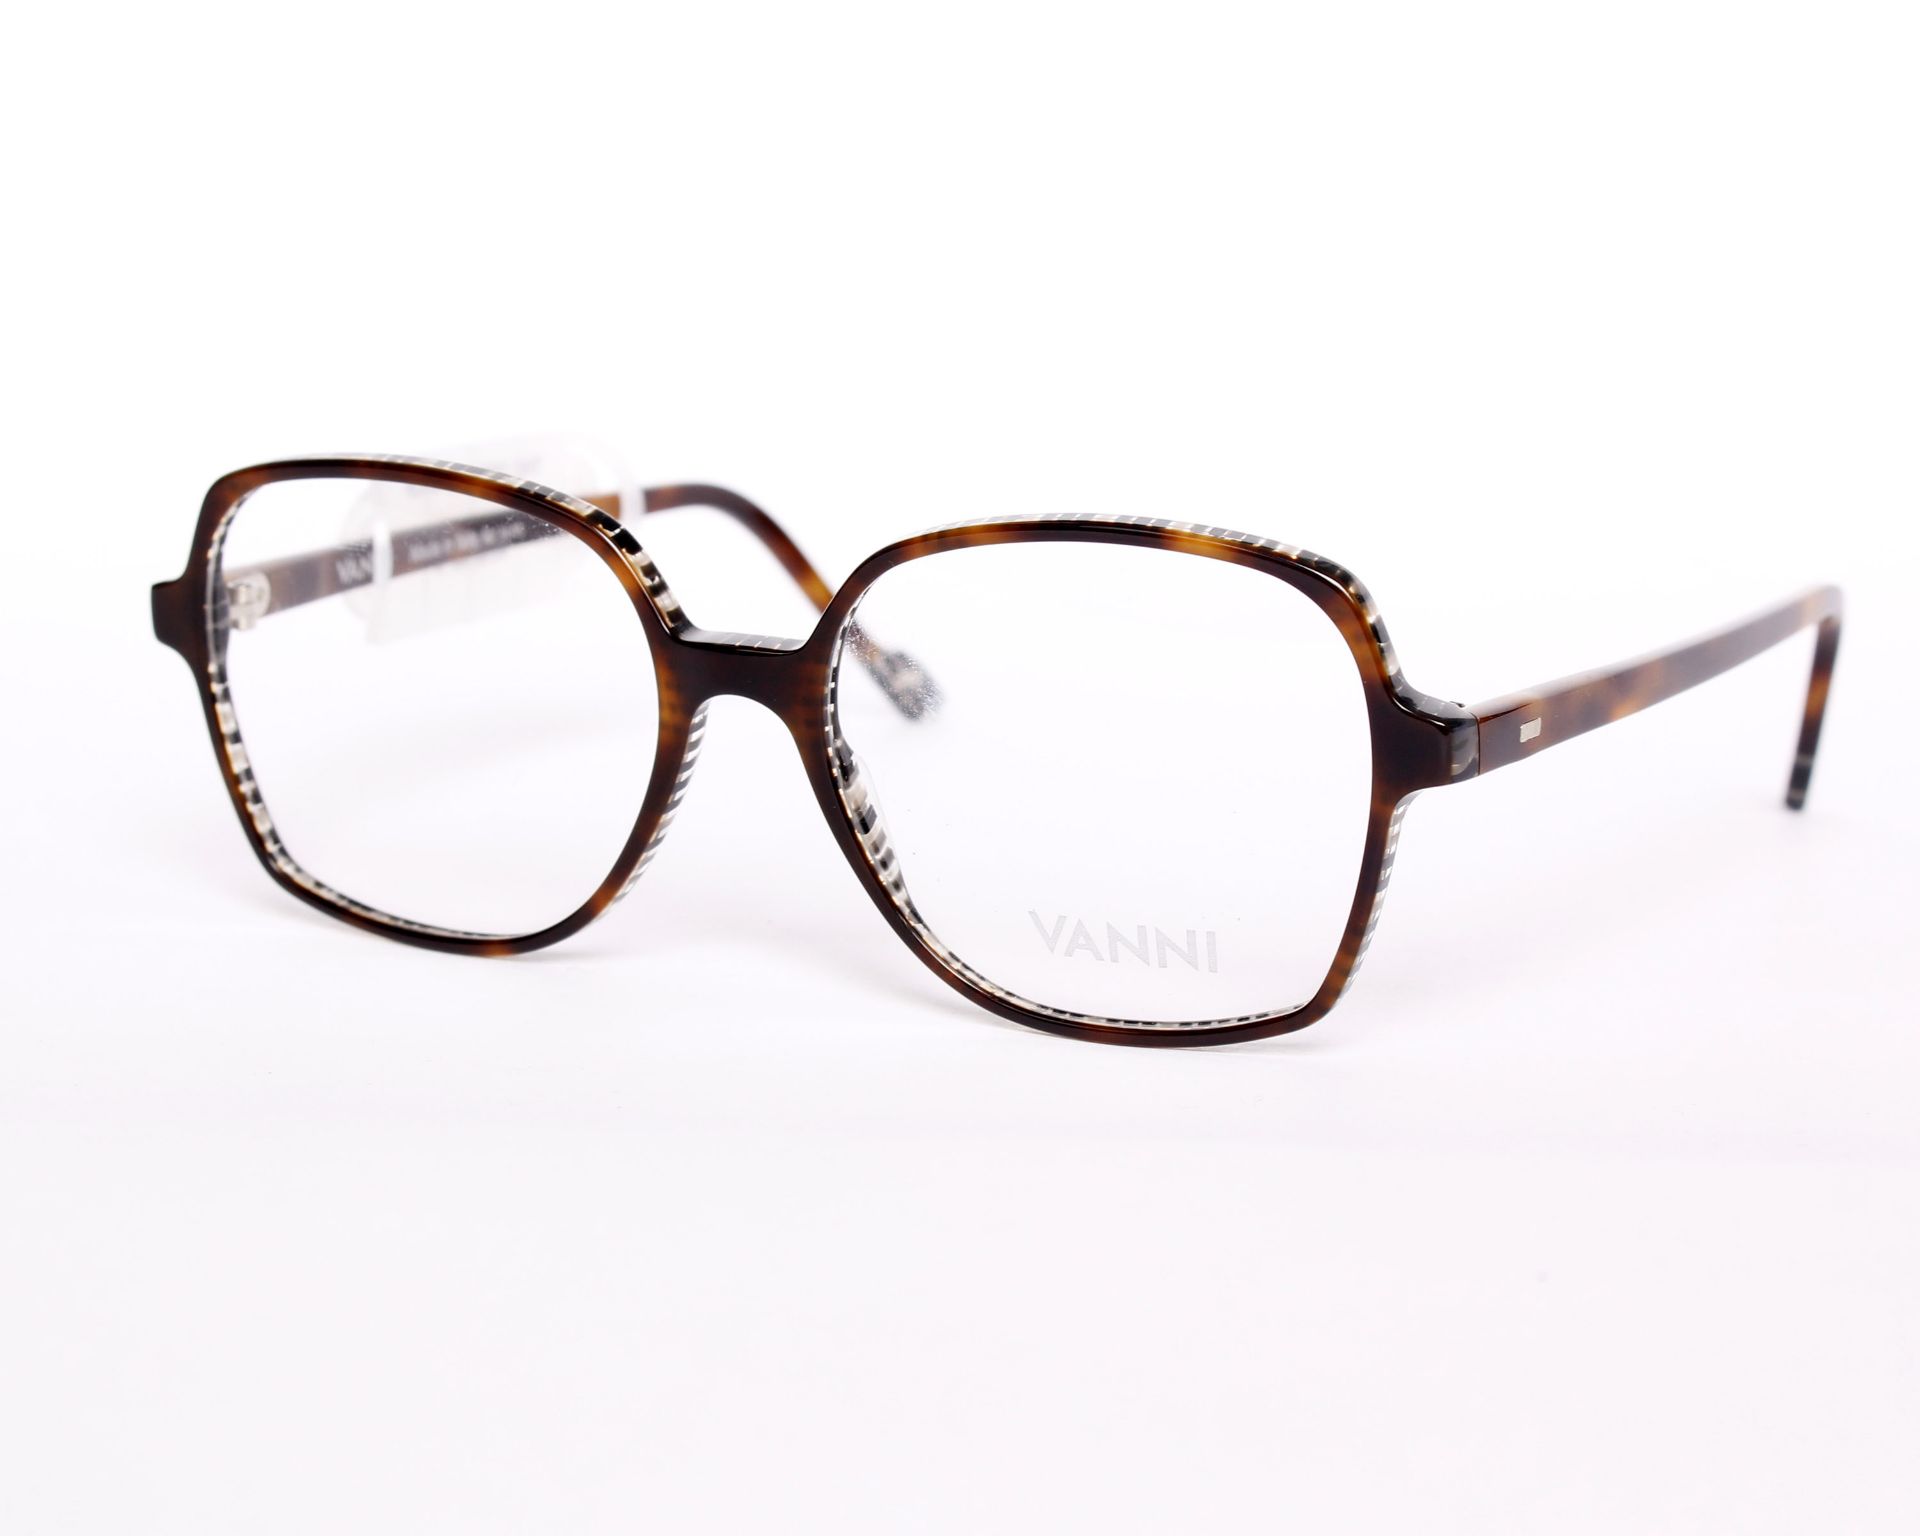 A pair of as new Vanni glasses frames with clear glass (RRP £220). - Image 2 of 3